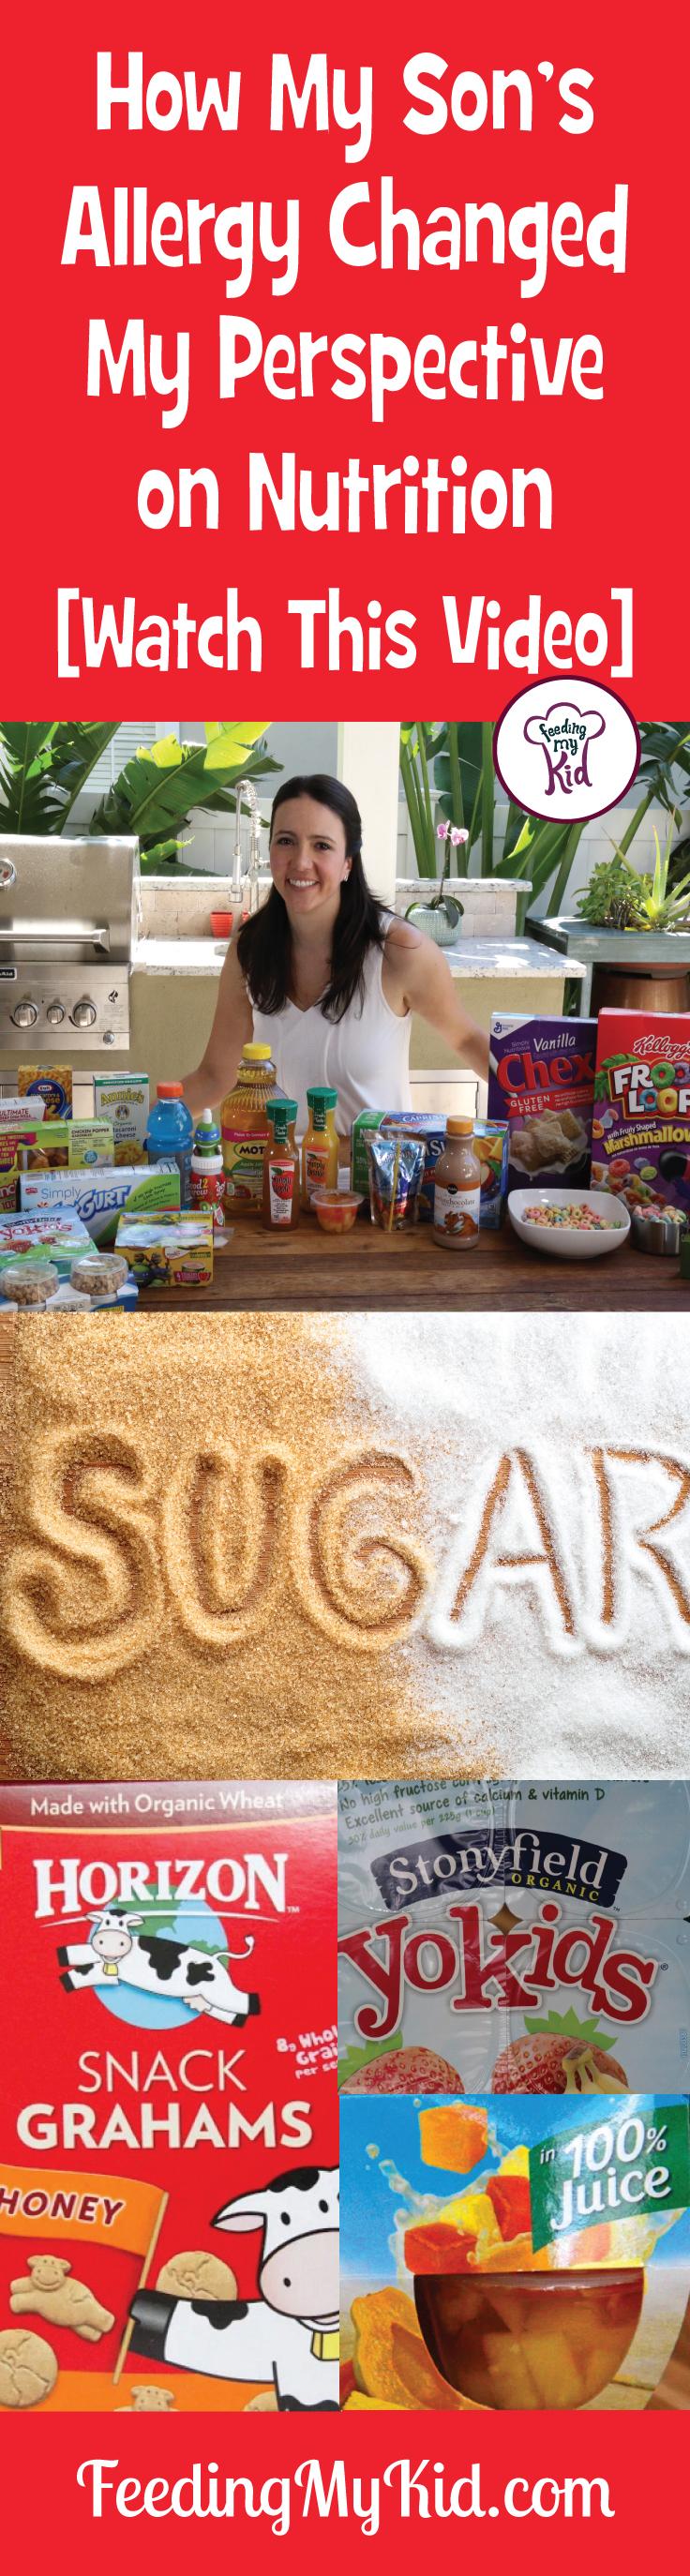 How Much Sugar Are Your Kids Having in a Day?